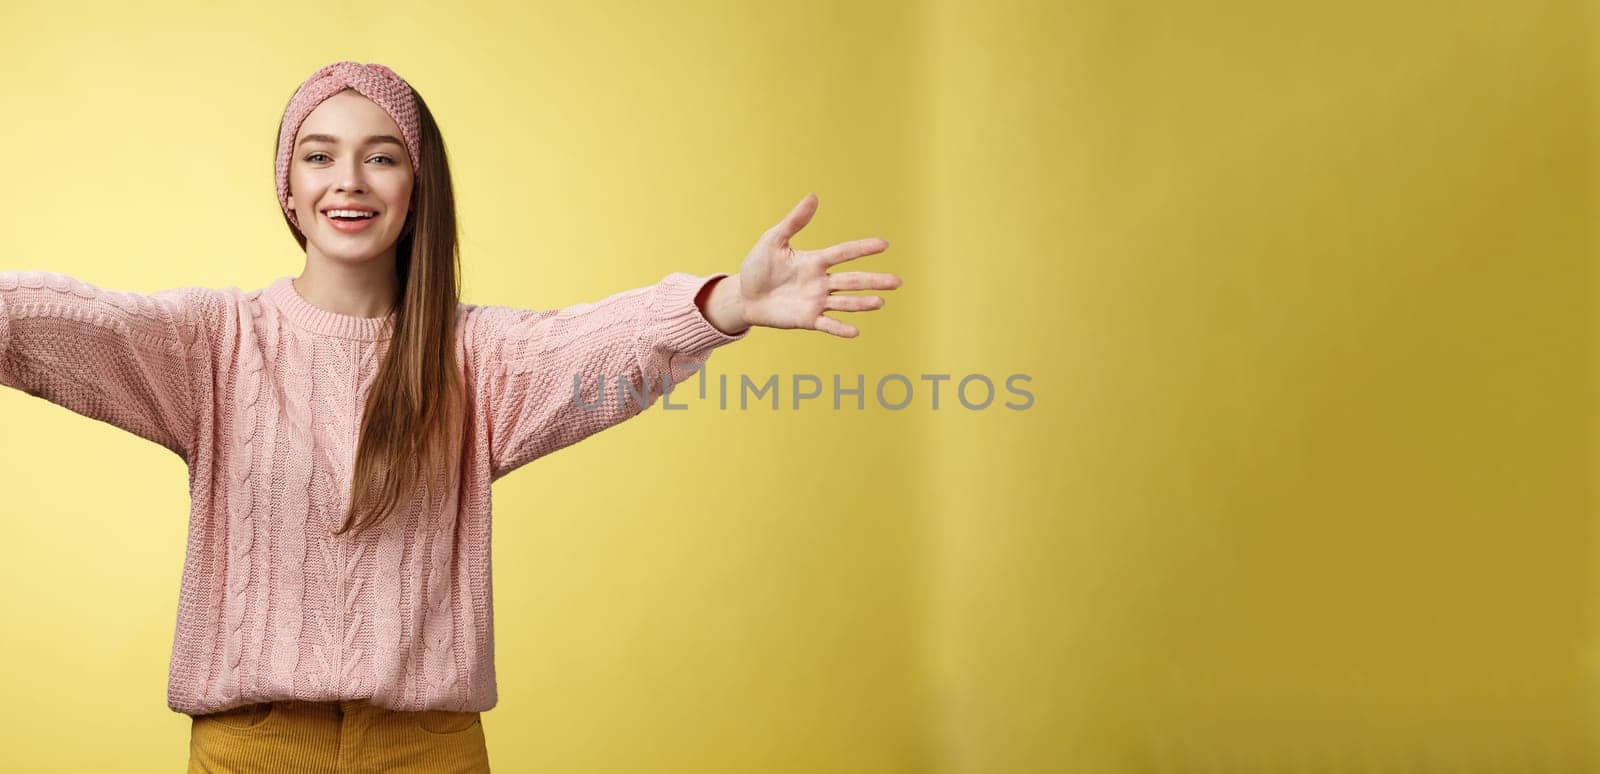 Attractive friendly positive young european woman wearing sweater, headband welcoming extanding arms and smiling at camera giving hugs, embraces friends, cuddling against yellow background. Copy space